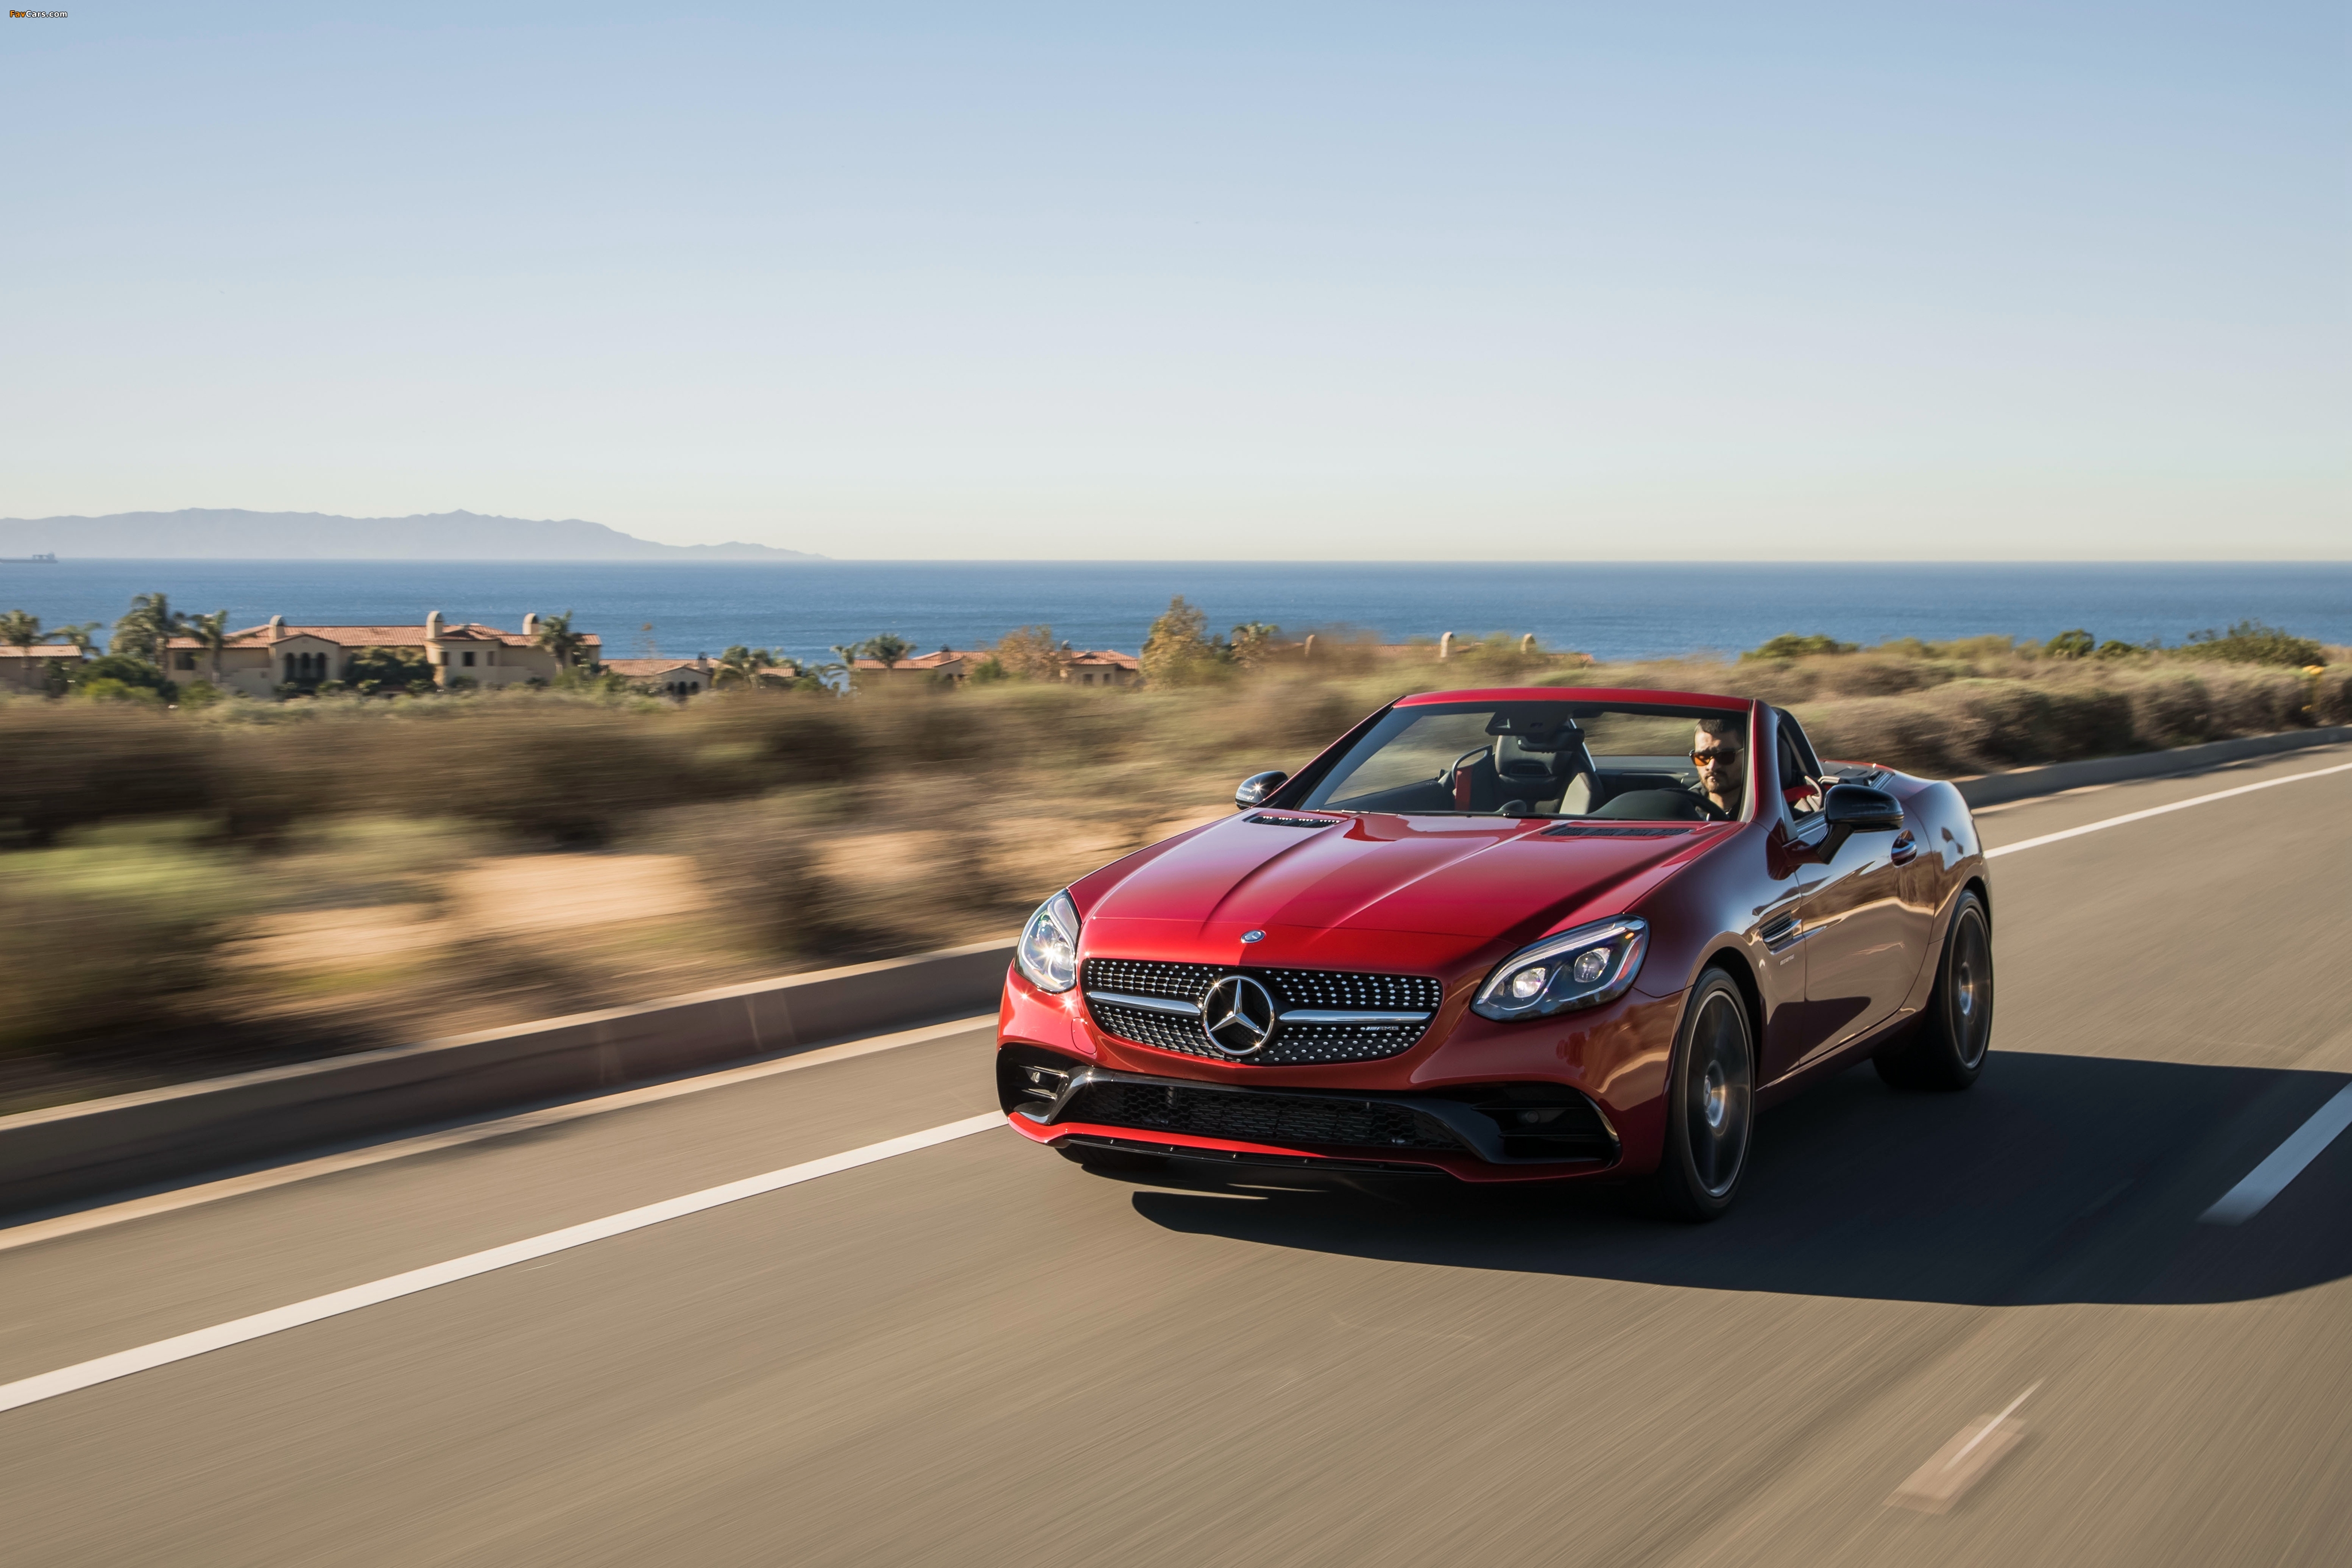 Mercedes-AMG SLC 43 North America (R172) 2016 pictures (4096 x 2731)